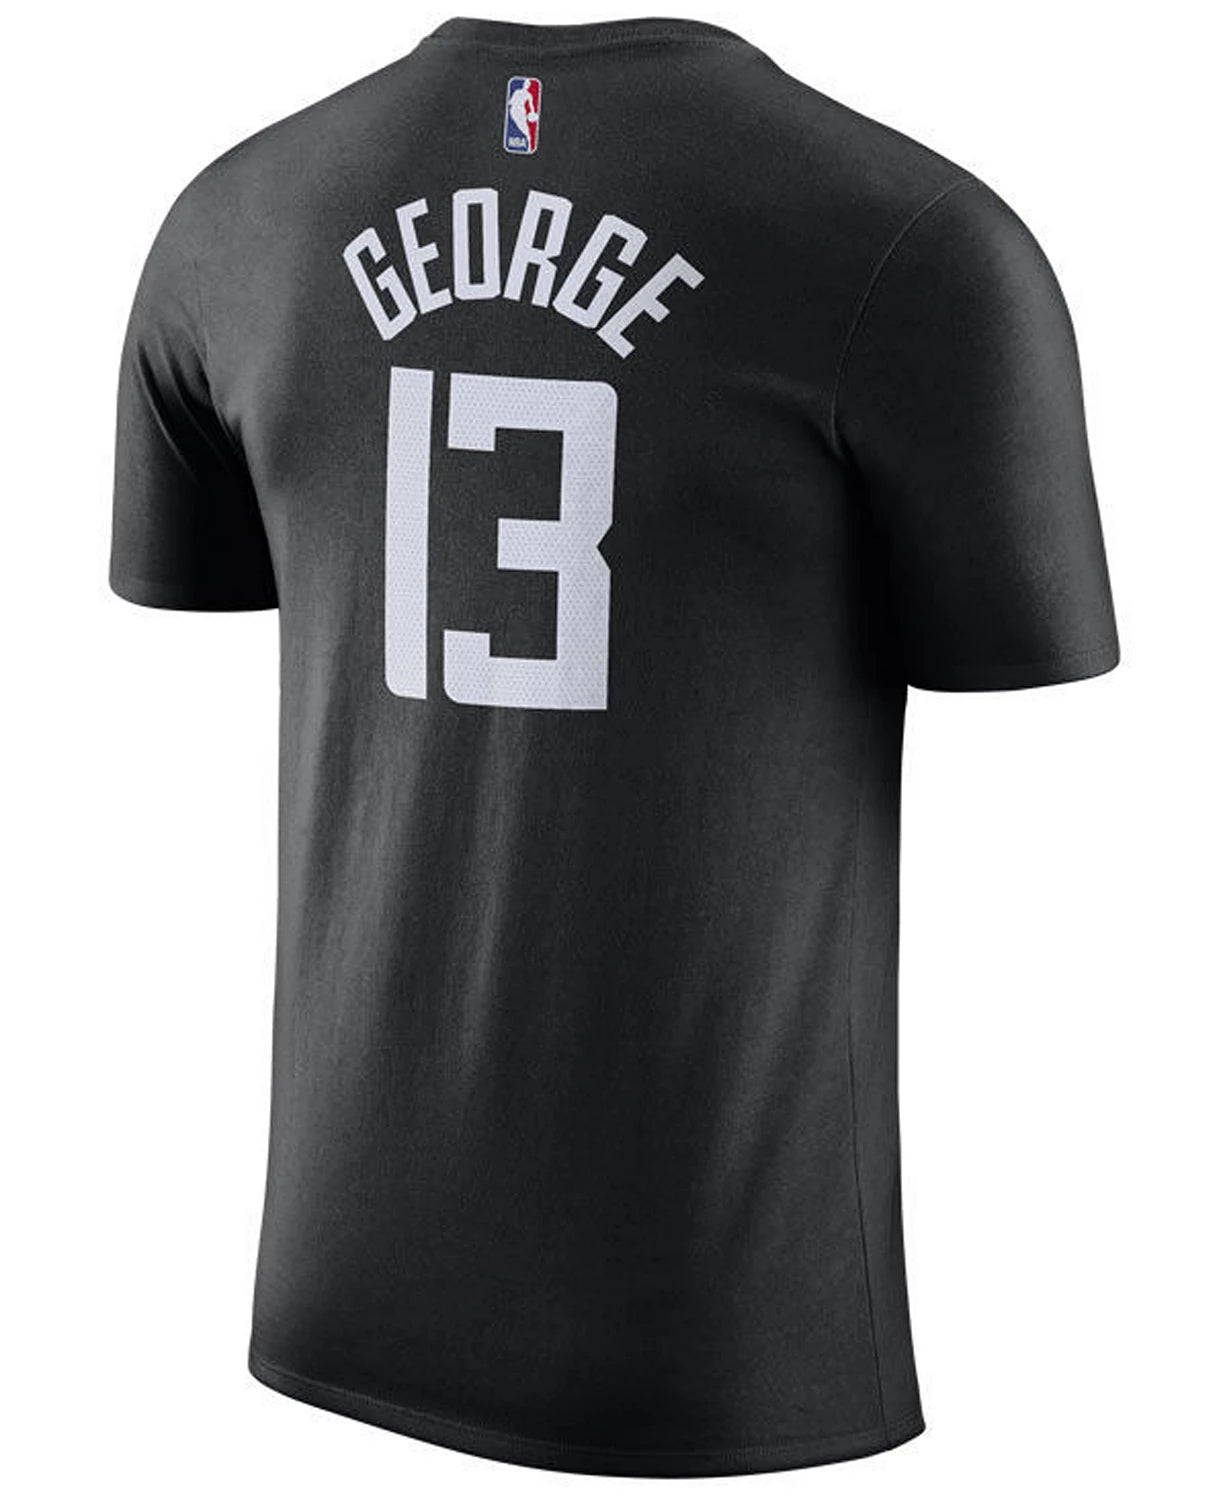 Paul George La Clippers Player Name & Number Competitor Shirt